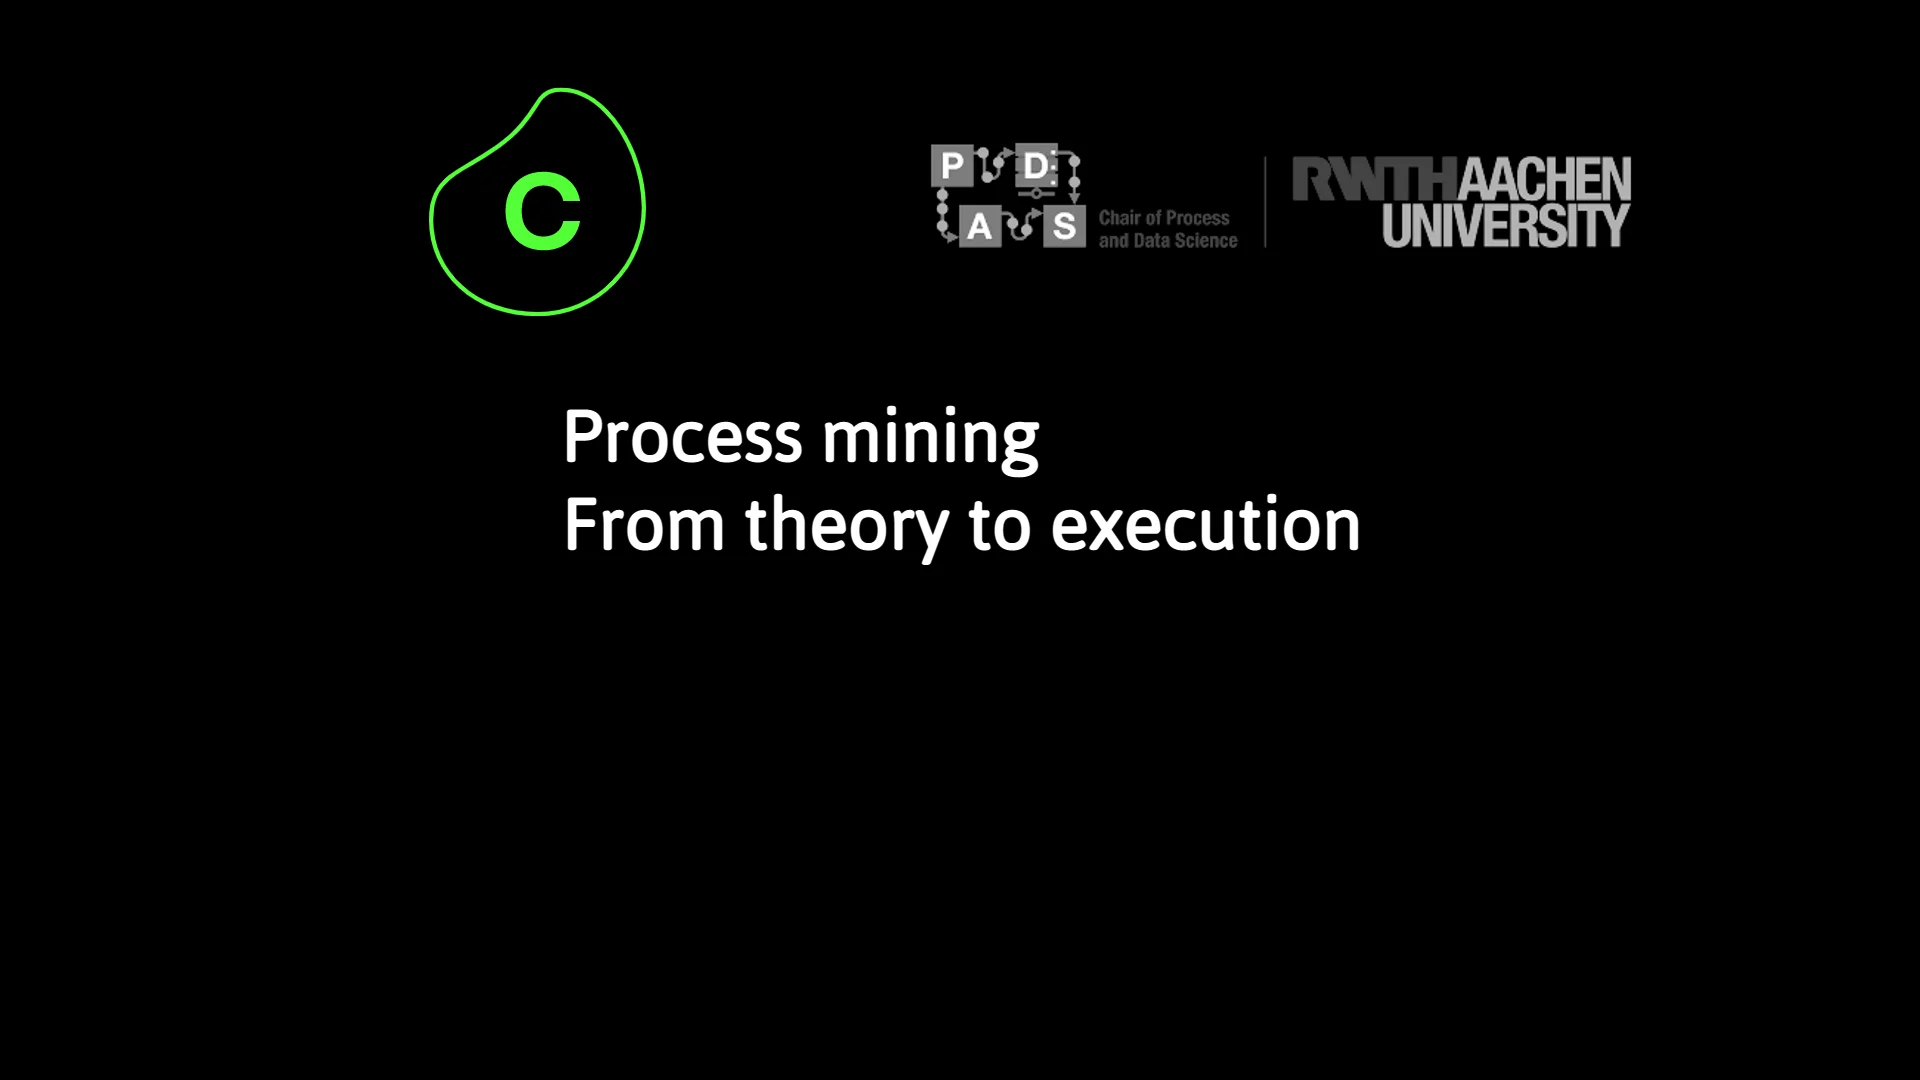 Celonis x RWTH Aachen Process Mining course: From Theory to Execution